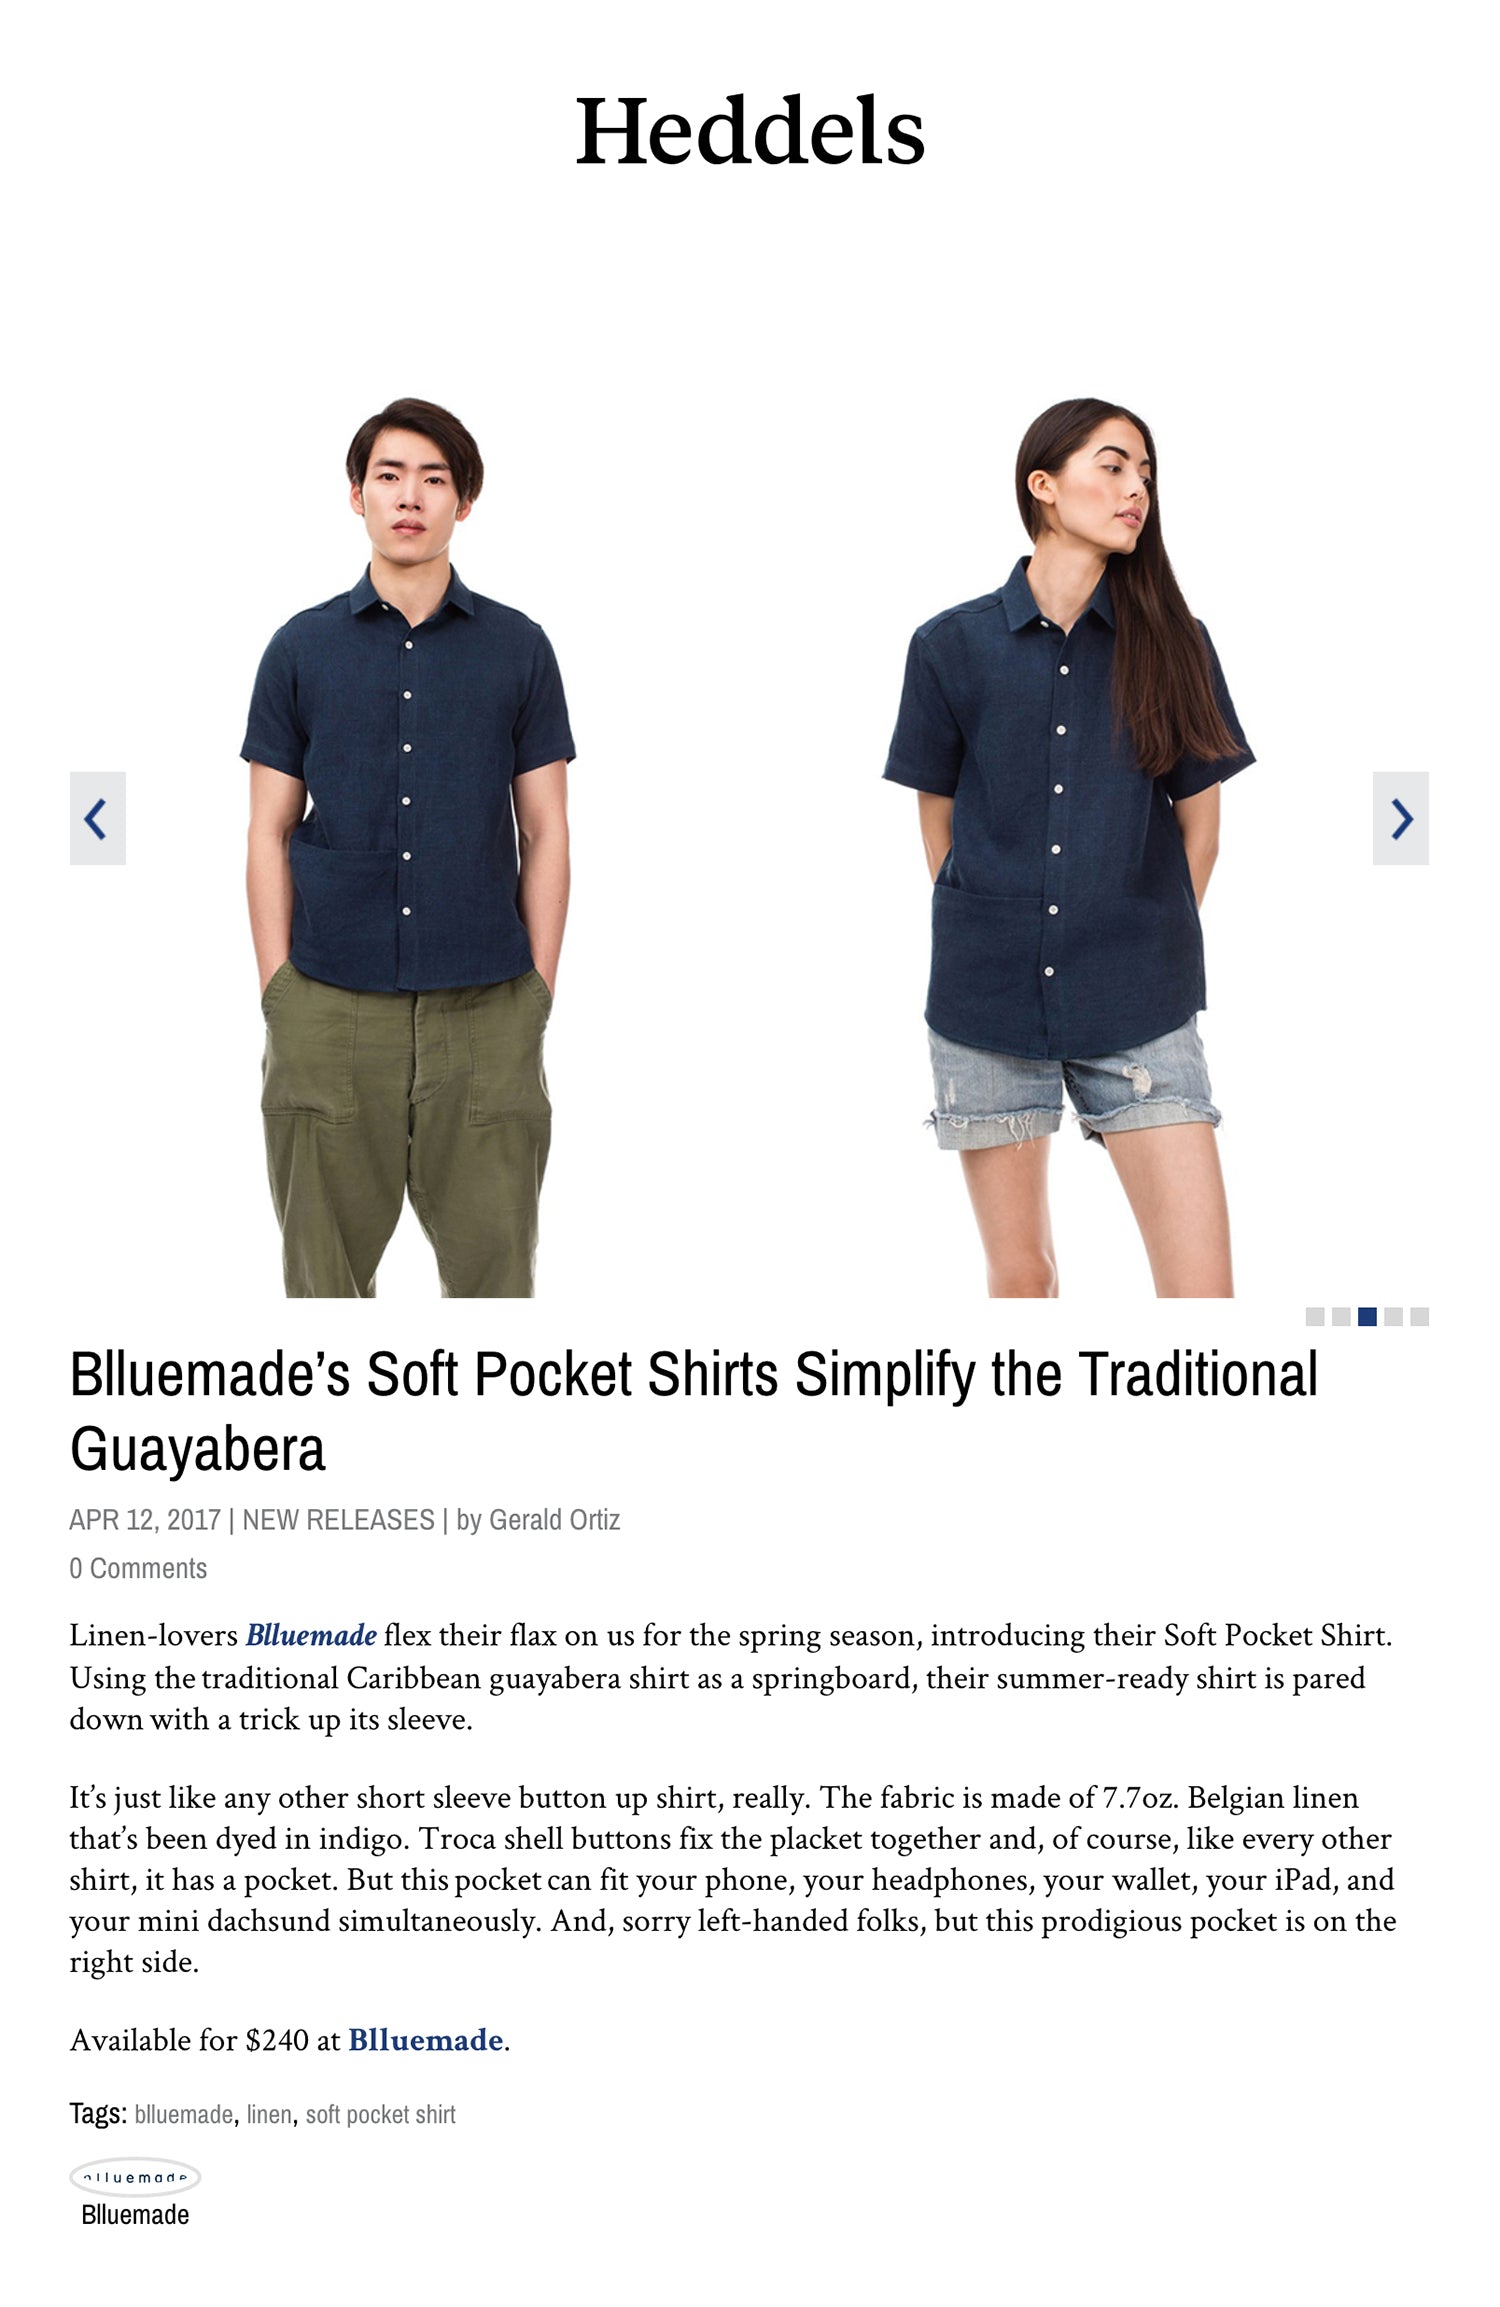 Heddels Article Blluemade’s Soft Pocket Shirts Simplify the Traditional Guayabera